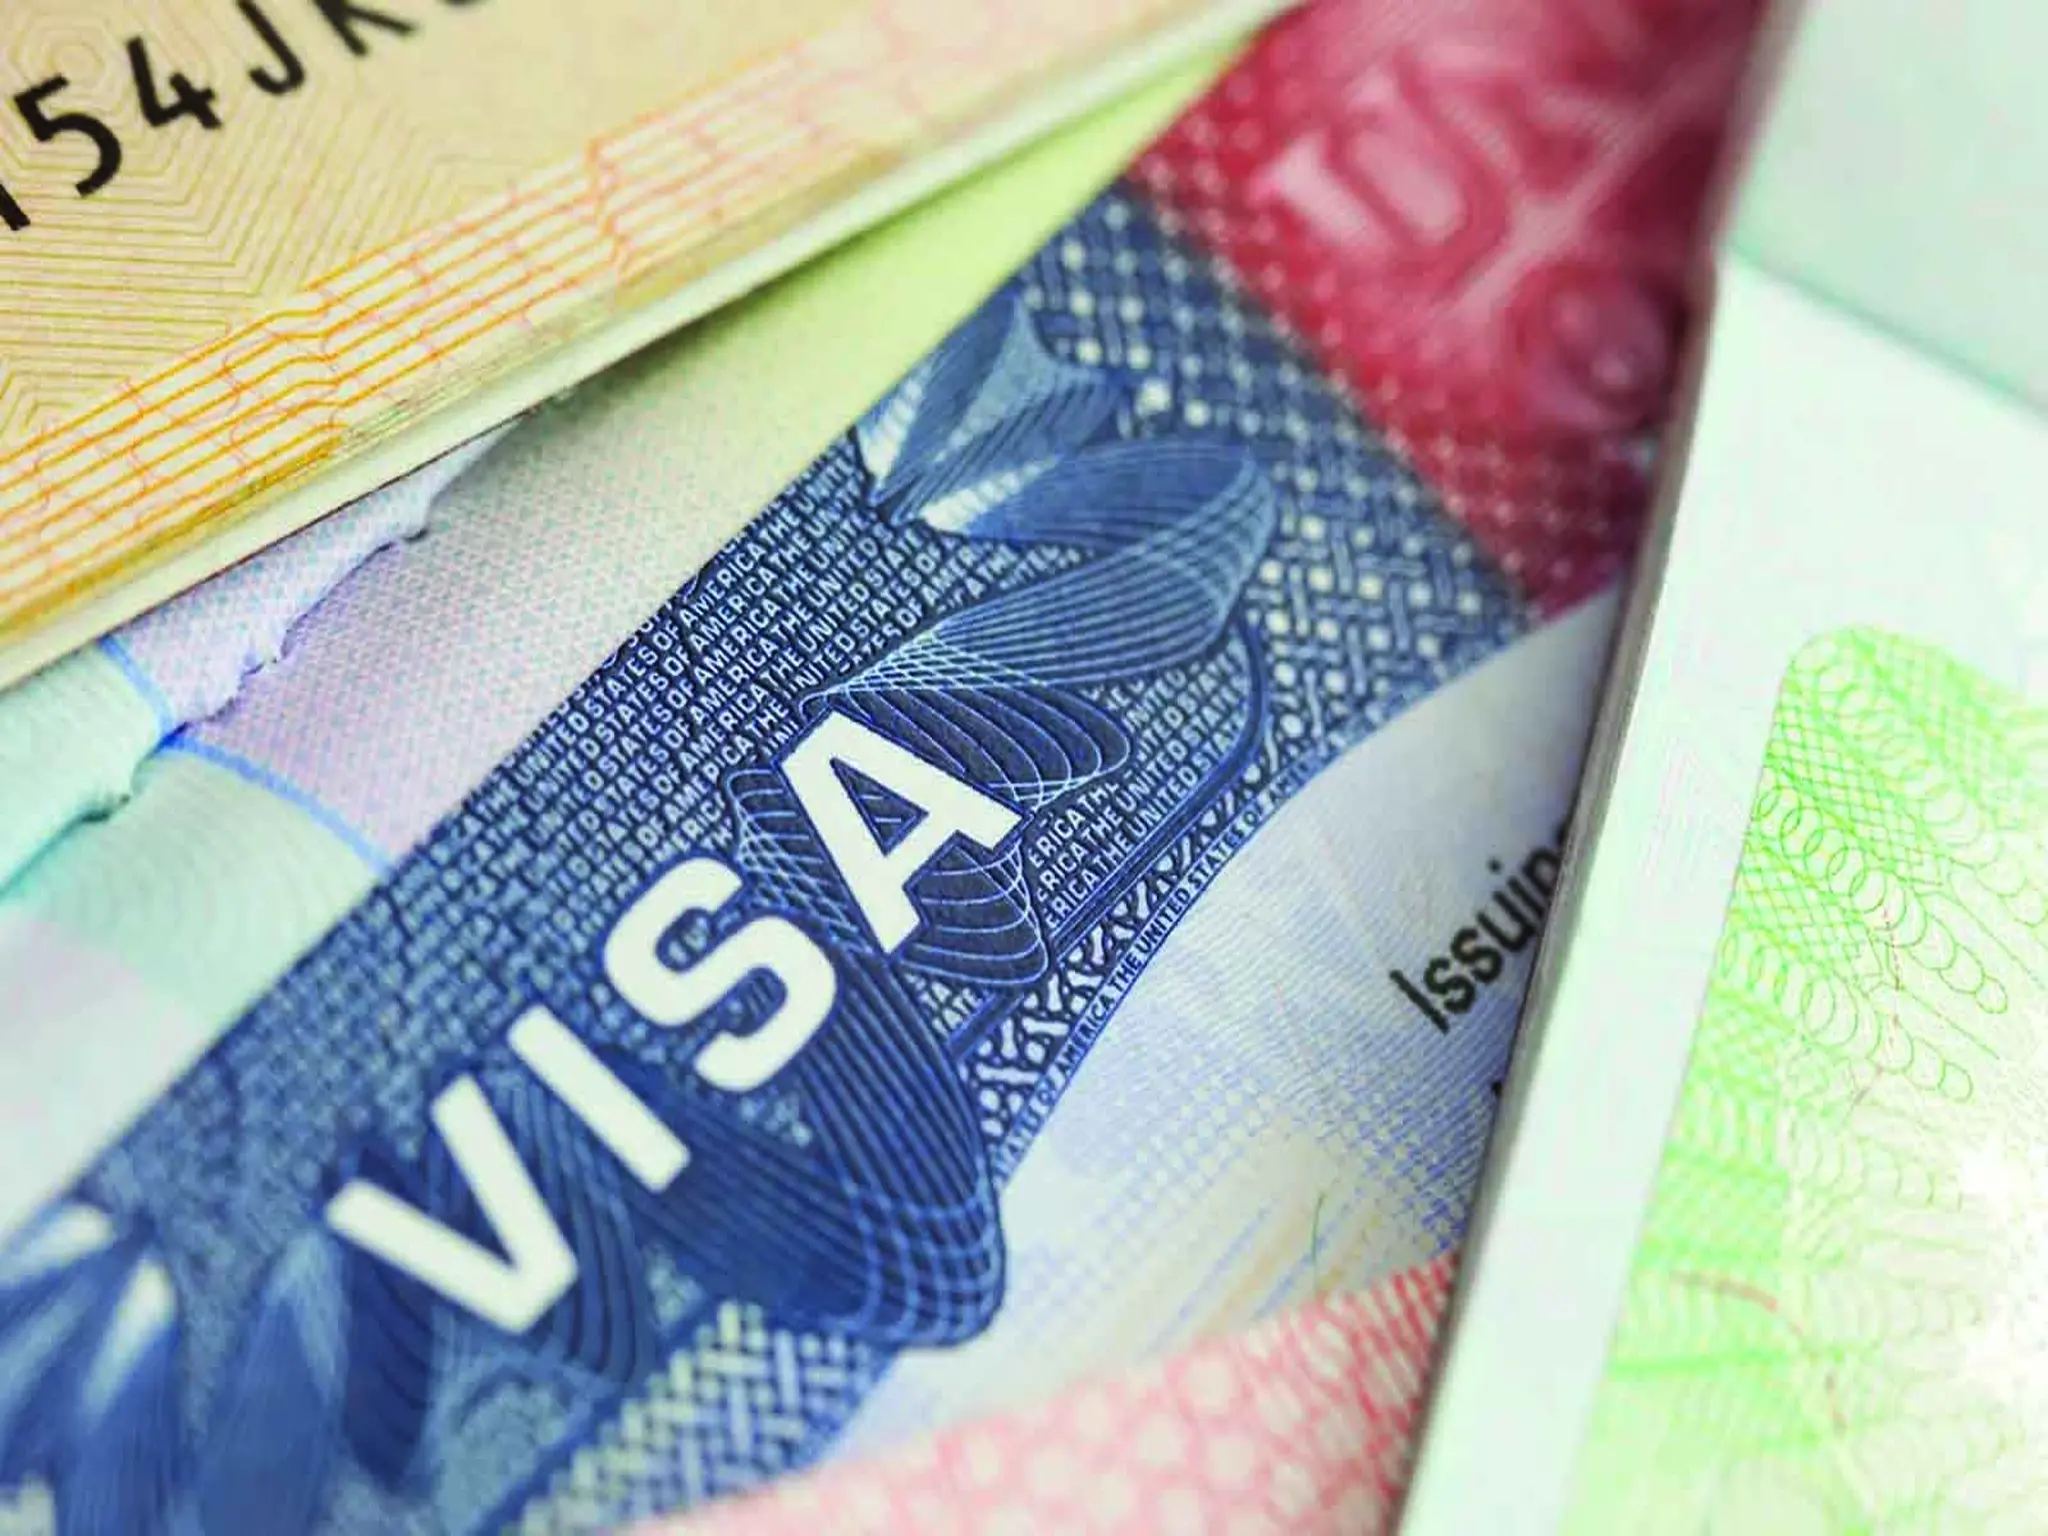 The UAE issues 5 categories for visa holders allowed to stay and work after their expiration